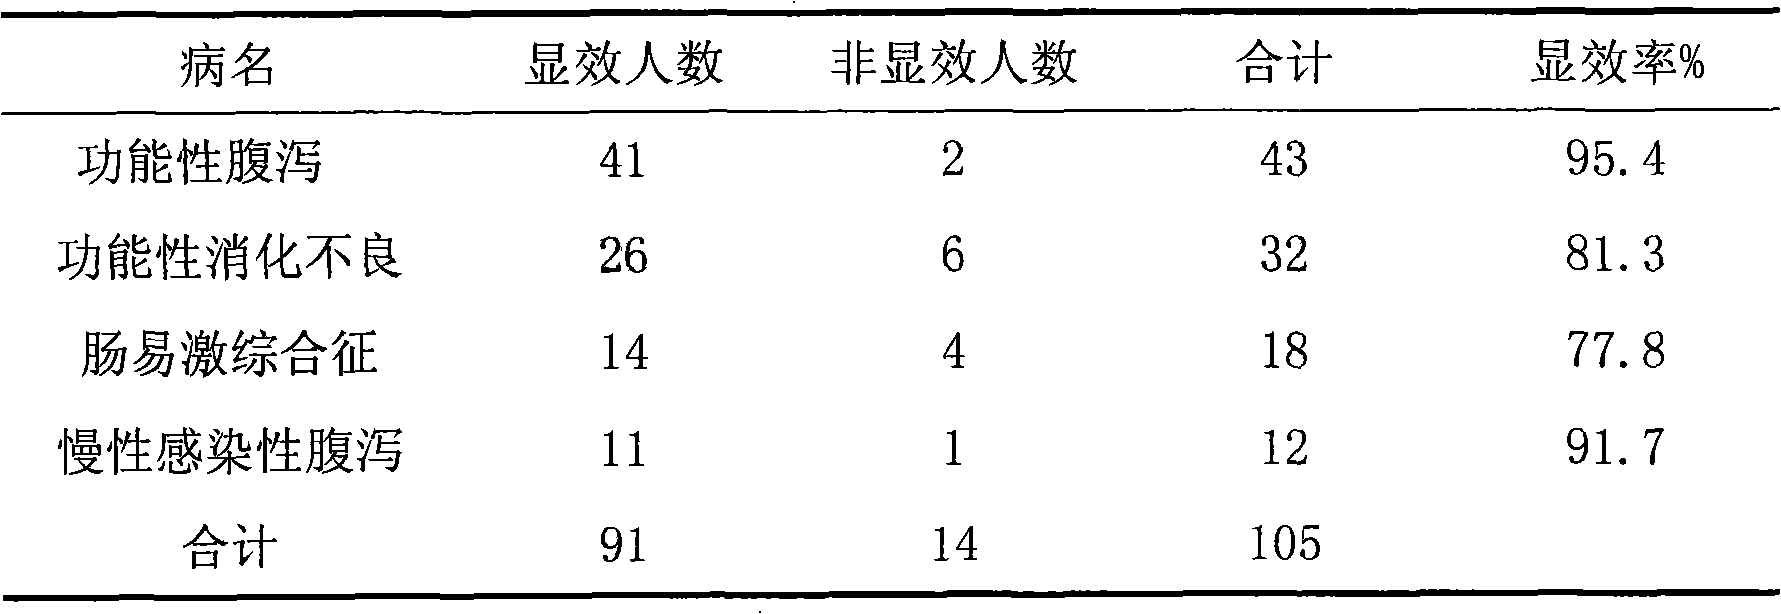 Chinese medicine composite for treating gastrointestinal diseases and preparation method thereof